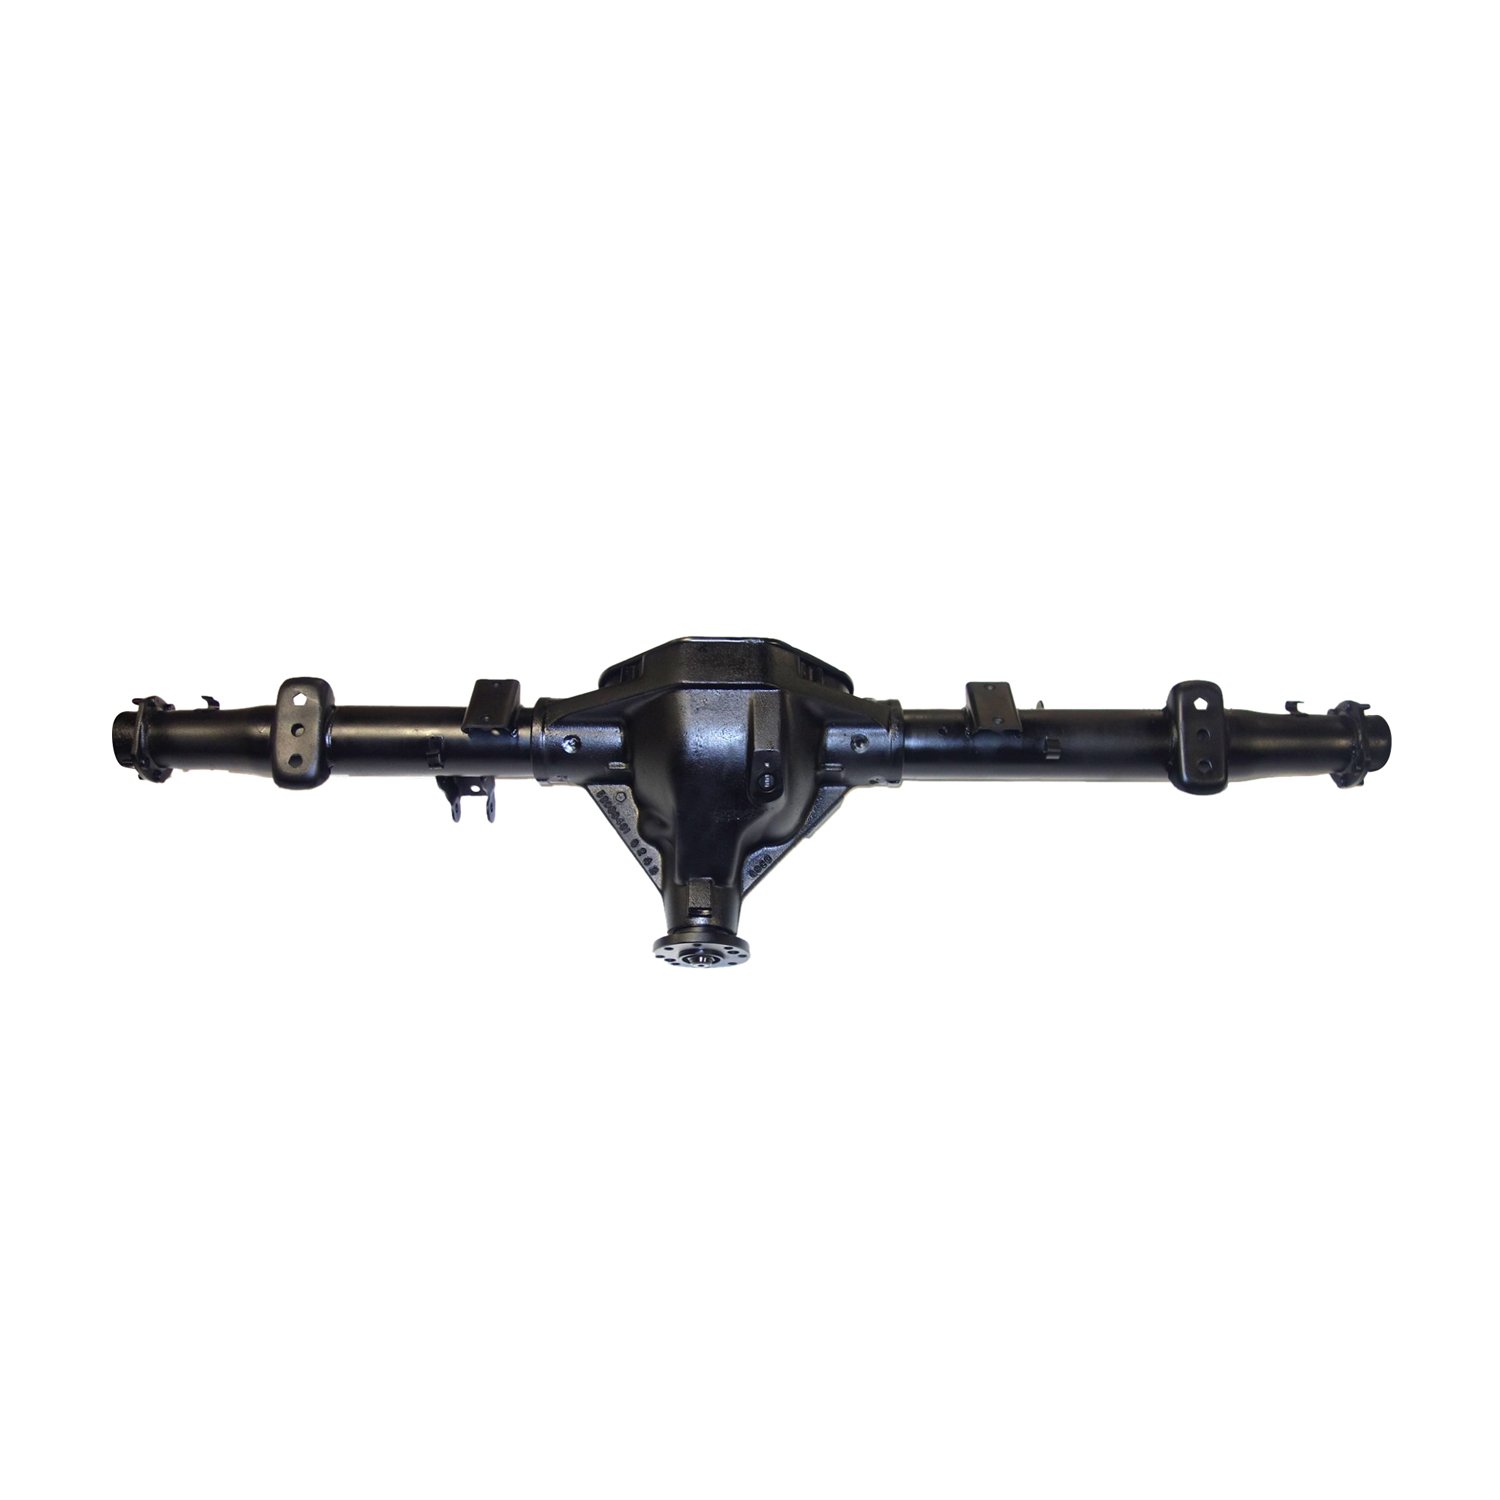 Remanufactured Axle Assy Chy 9.25" 2006 Durango 3.92 , 4x4 w/ Traction Control, Posi LSD